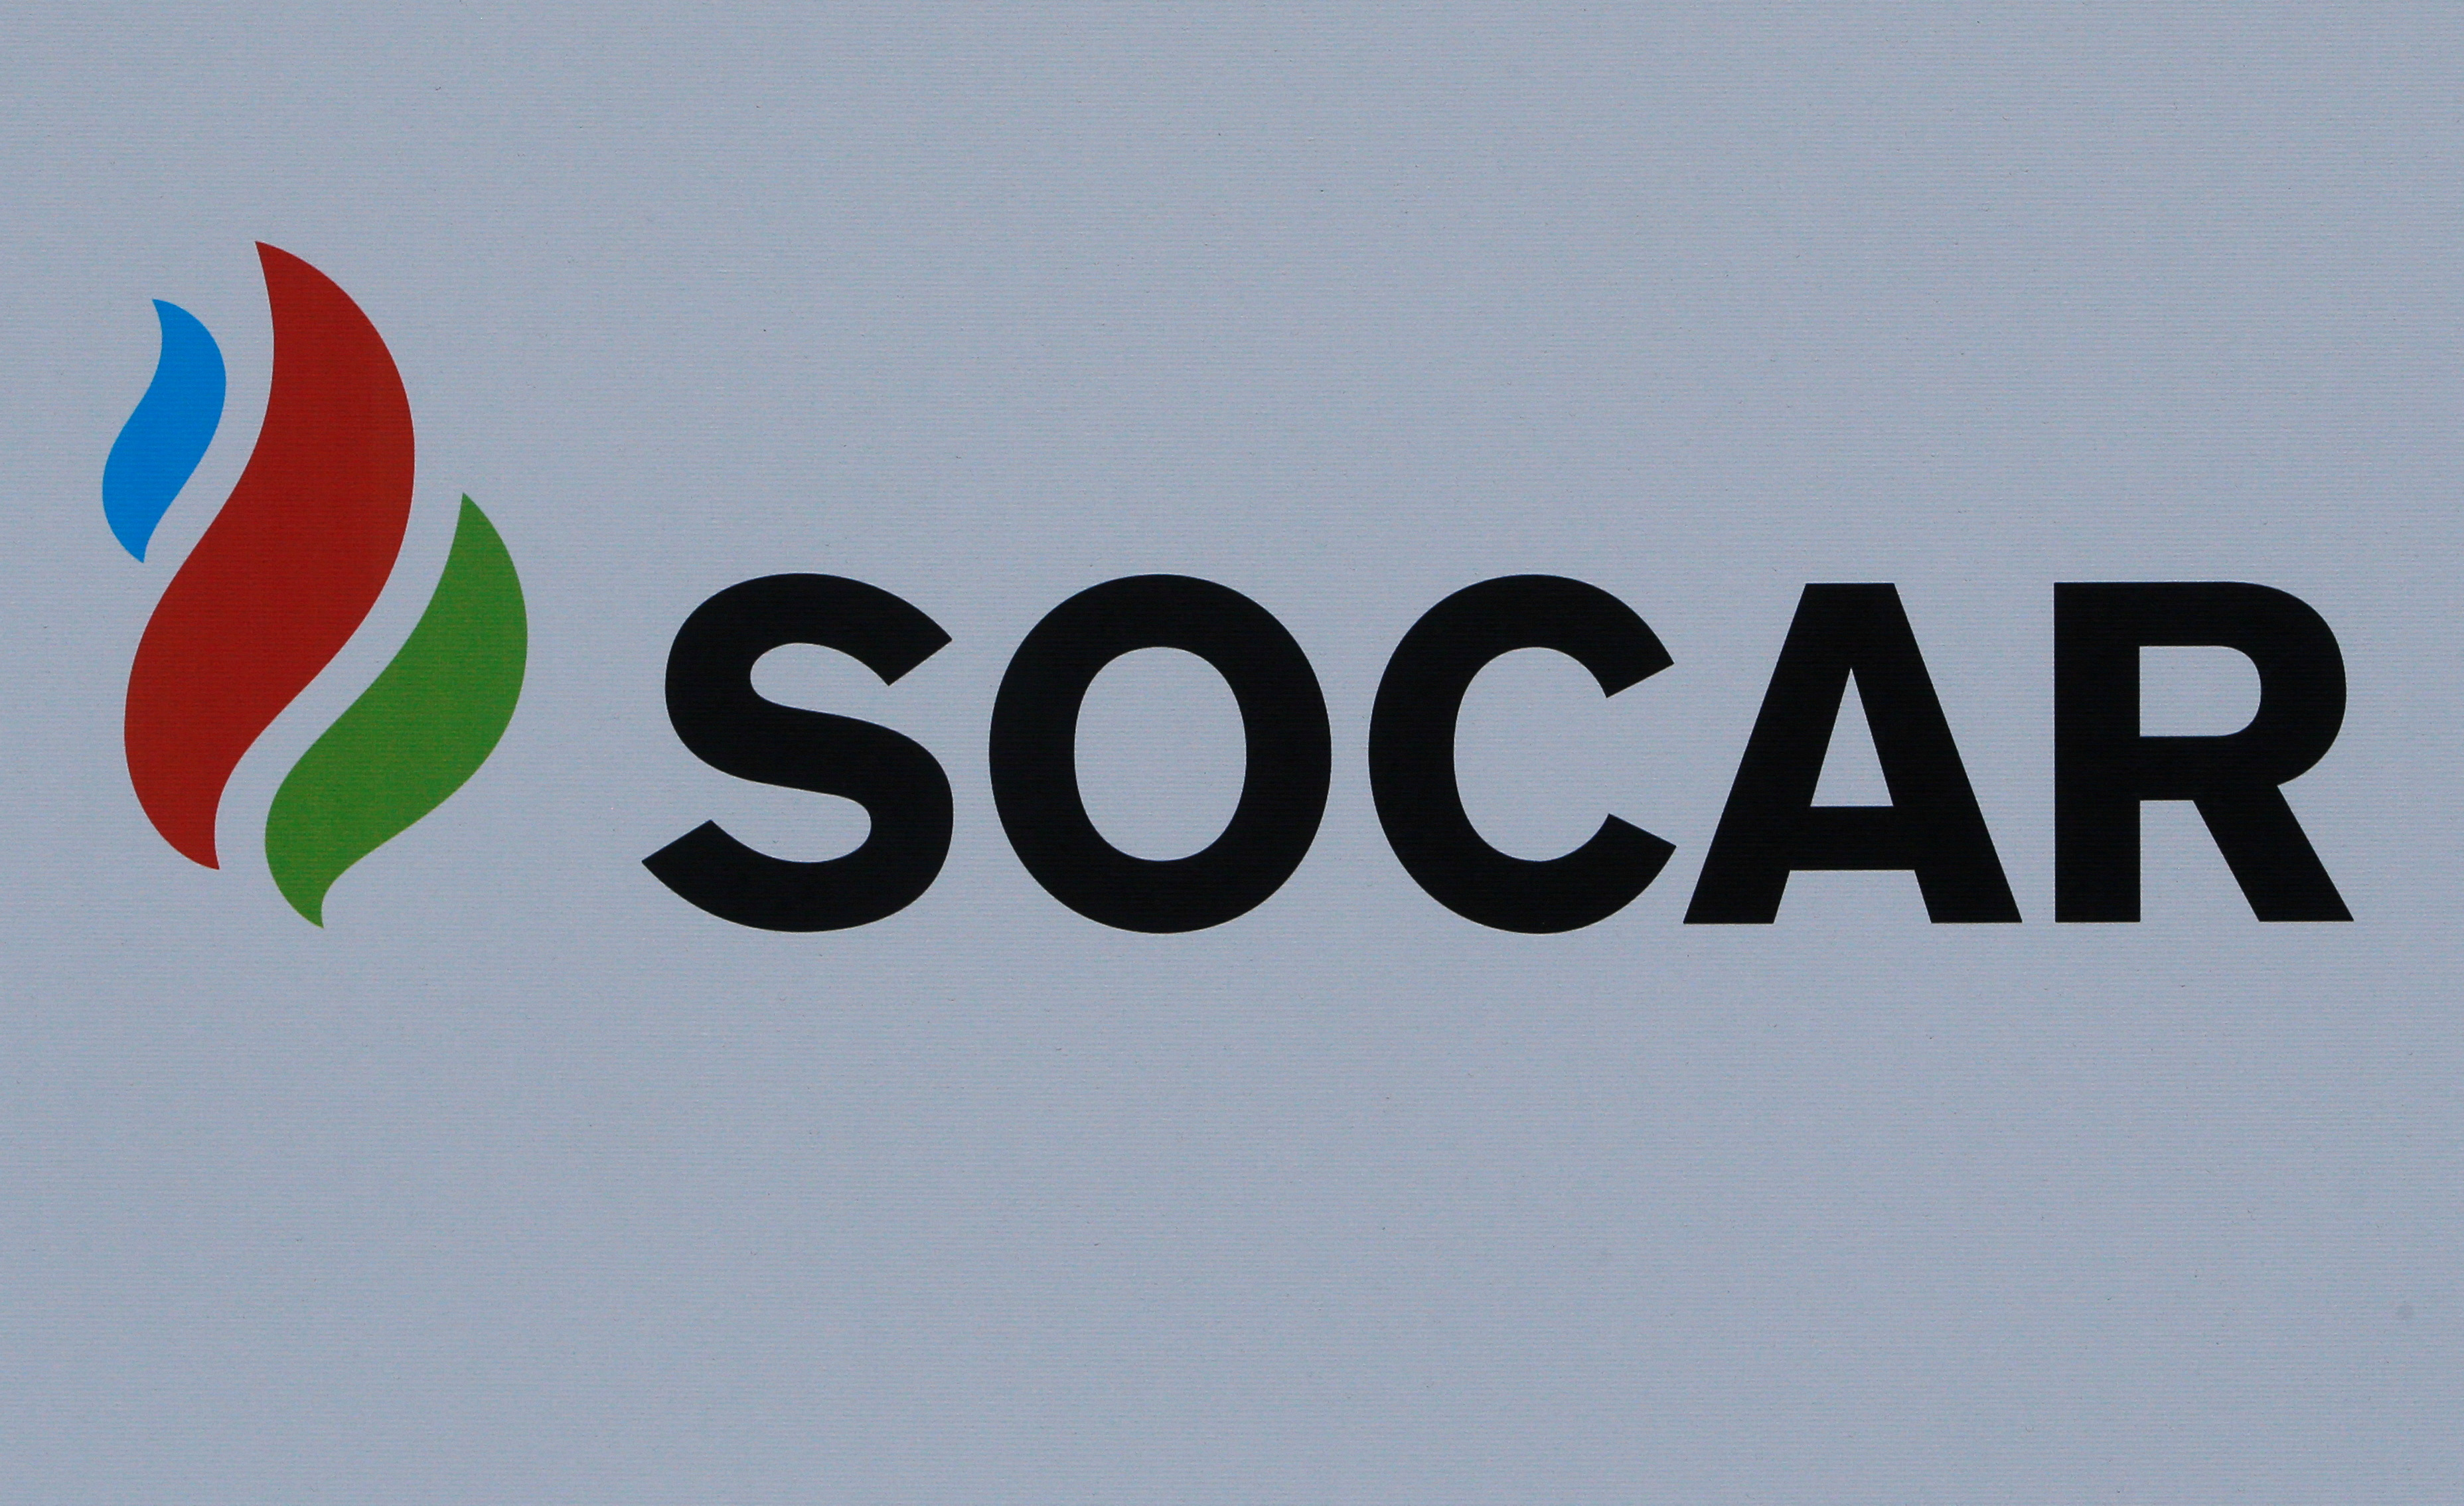 The logo of Azerbaijan's state energy company SOCAR is seen on a board at the SPIEF 2017 in St. Petersburg